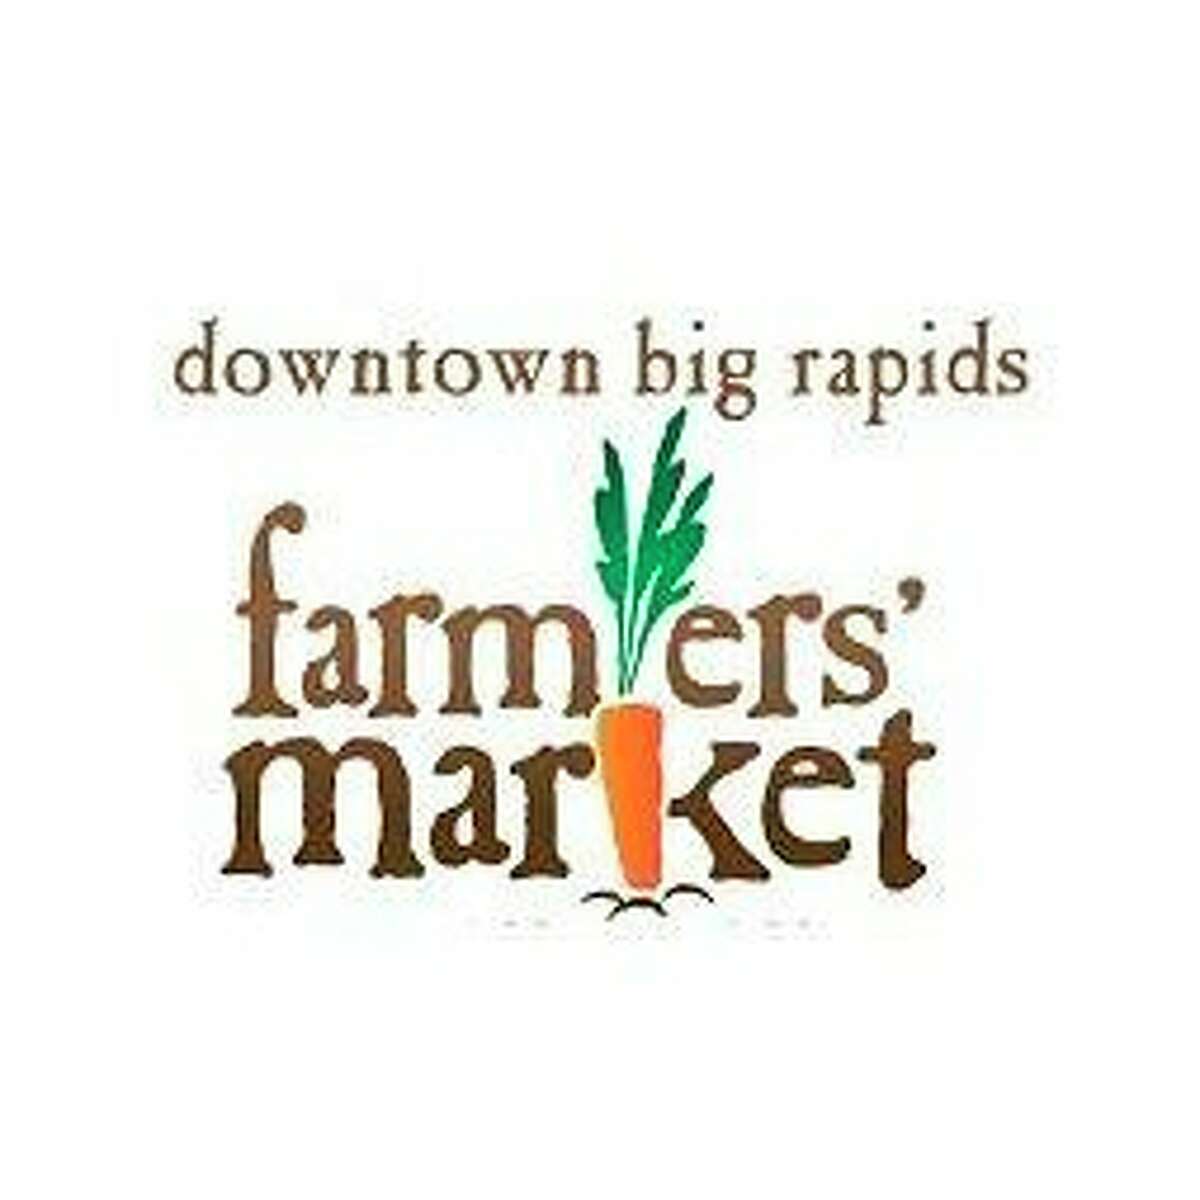 The market will open Tuesday from noon to 5 p.m., in front of City Hall. To stay up to date on the market, times, and what it will offer, follow "Big Rapids Farmers' Market" on Facebook. (Courtesy photo)